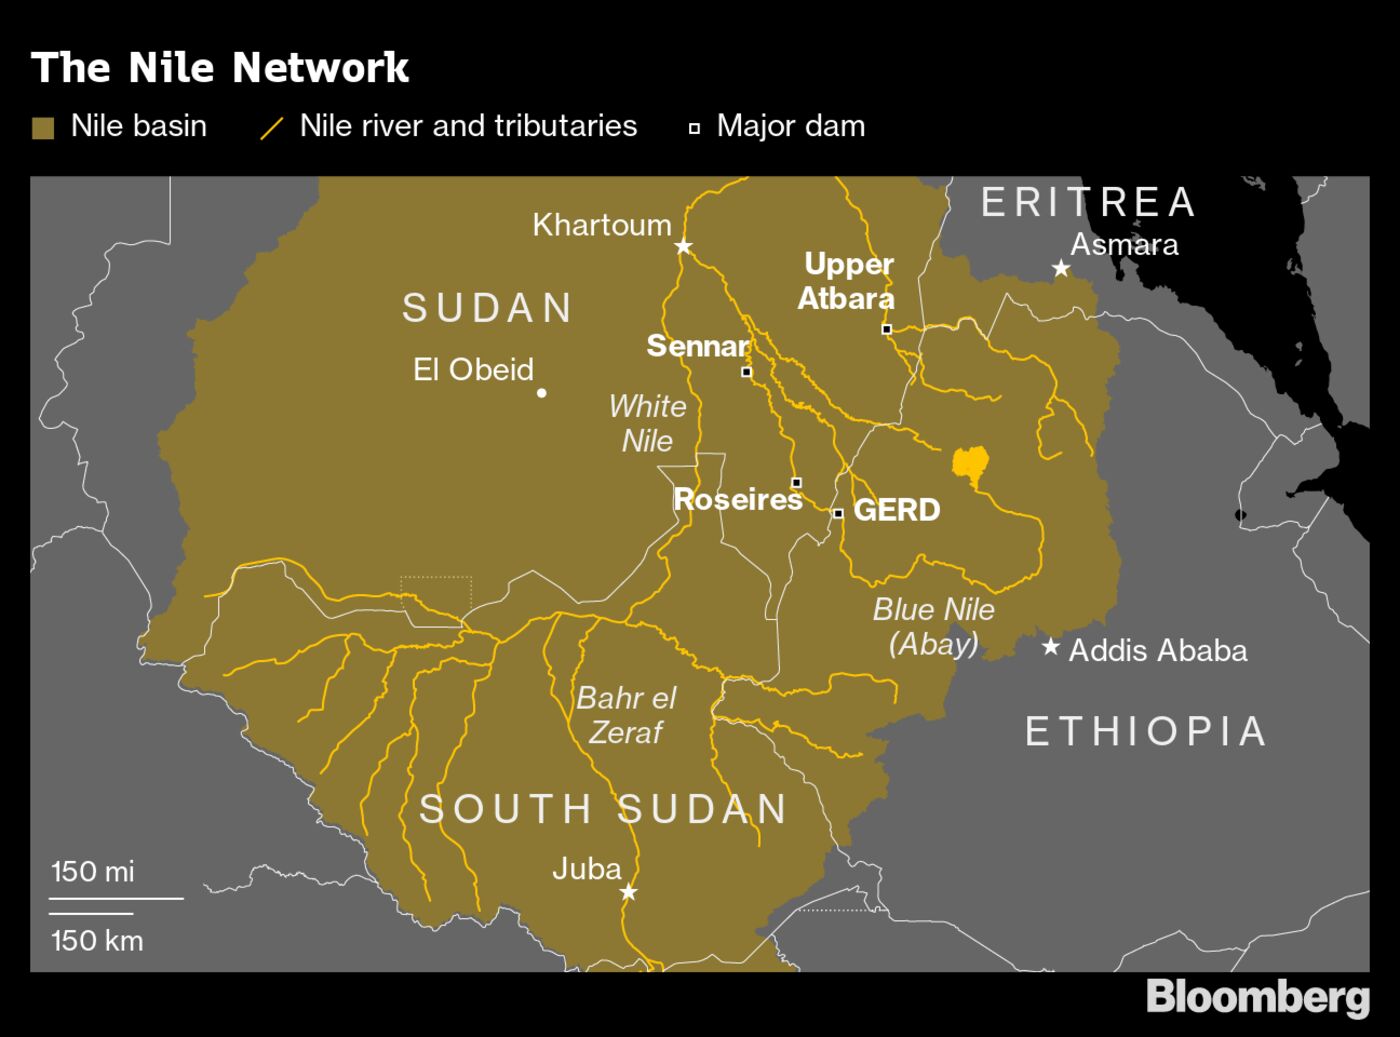 The Nile Network